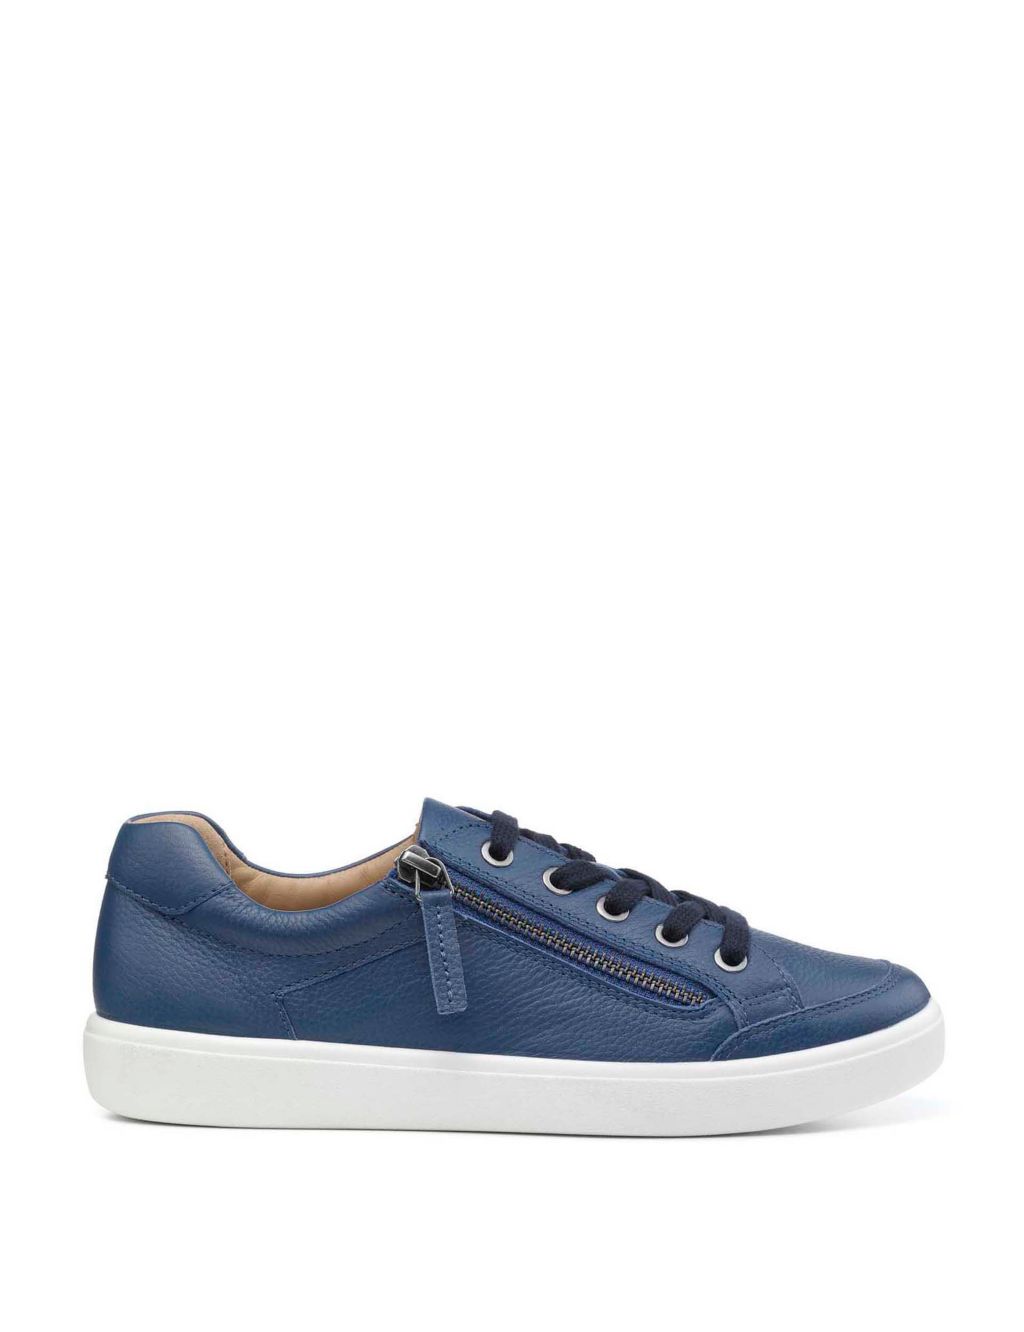 Chase II Wide Fit Leather Metallic Trainers image 1